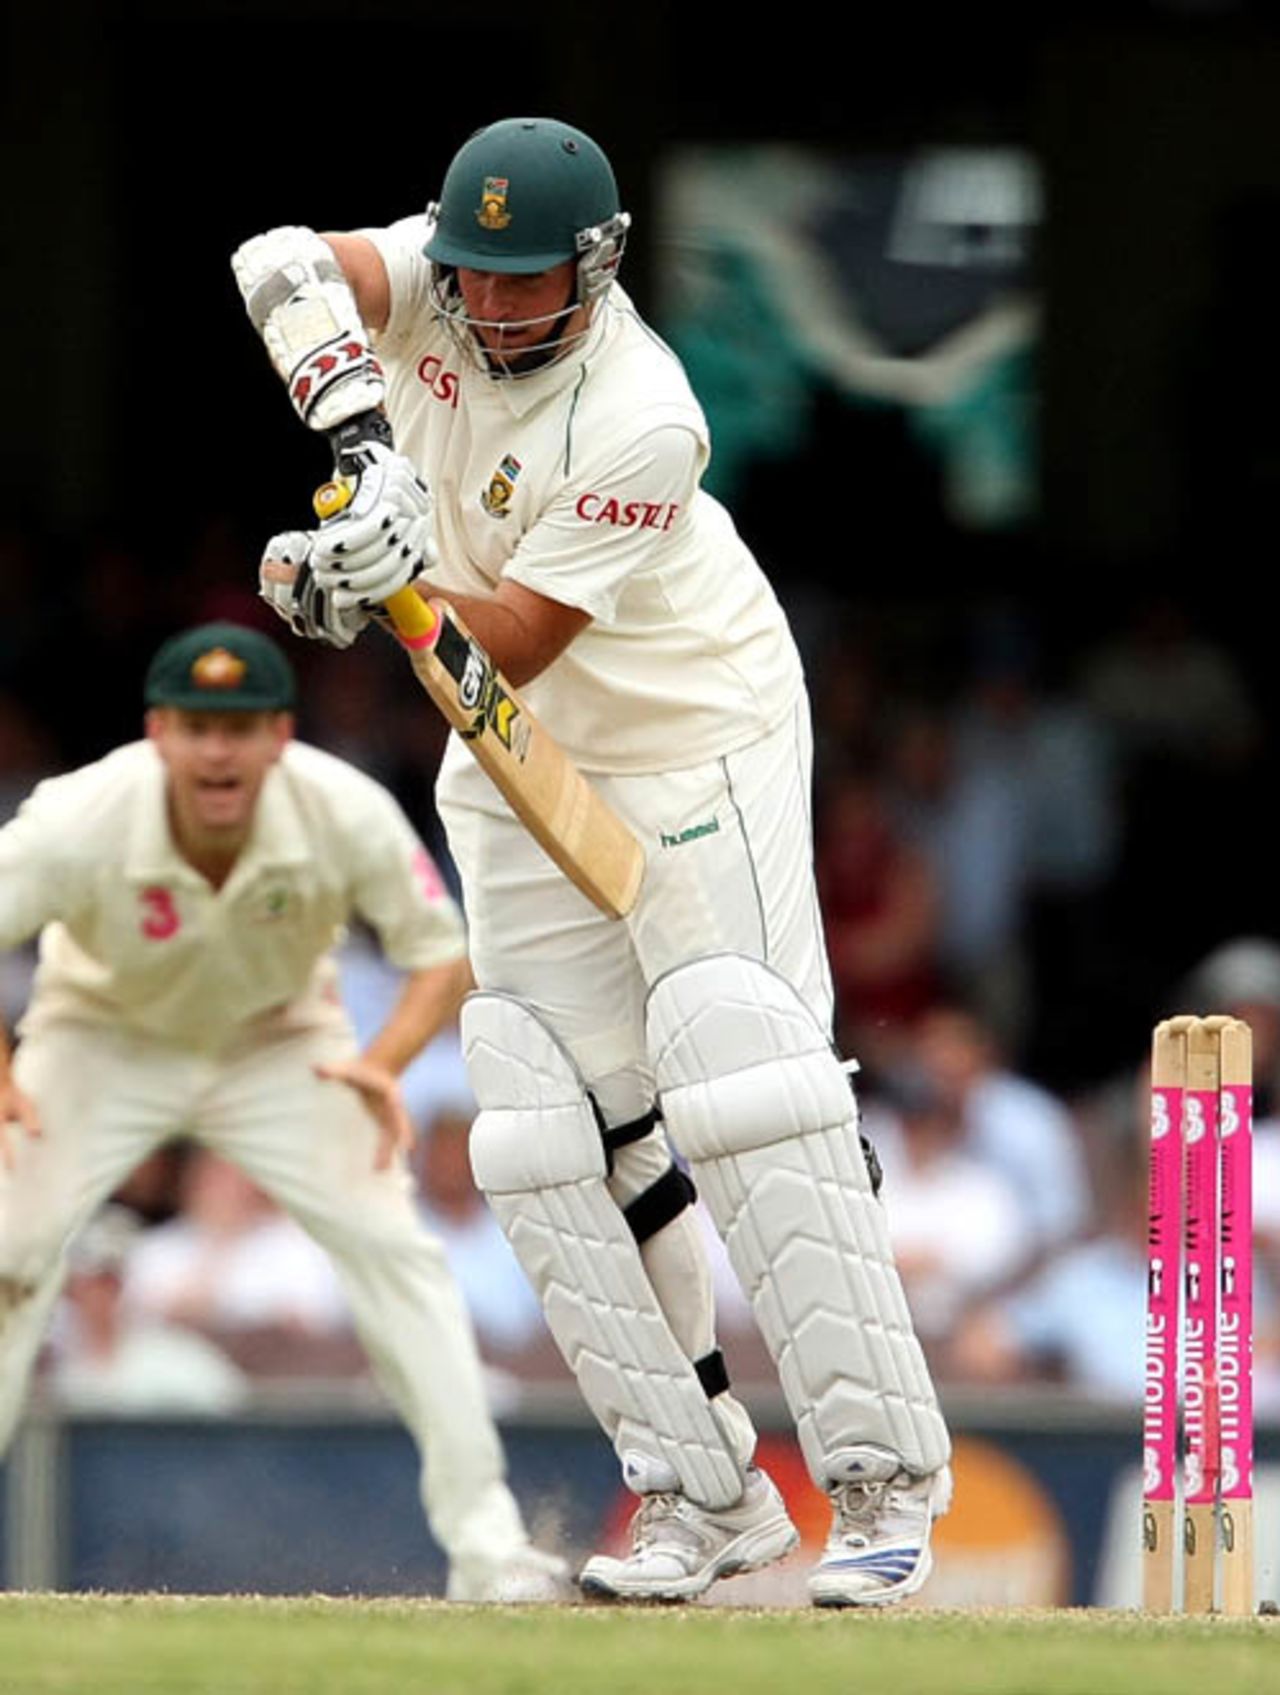 An injured Graeme Smith fends off a delivery, Australia v South Africa, 3rd Test, 5th day, Sydney, January 7, 2009